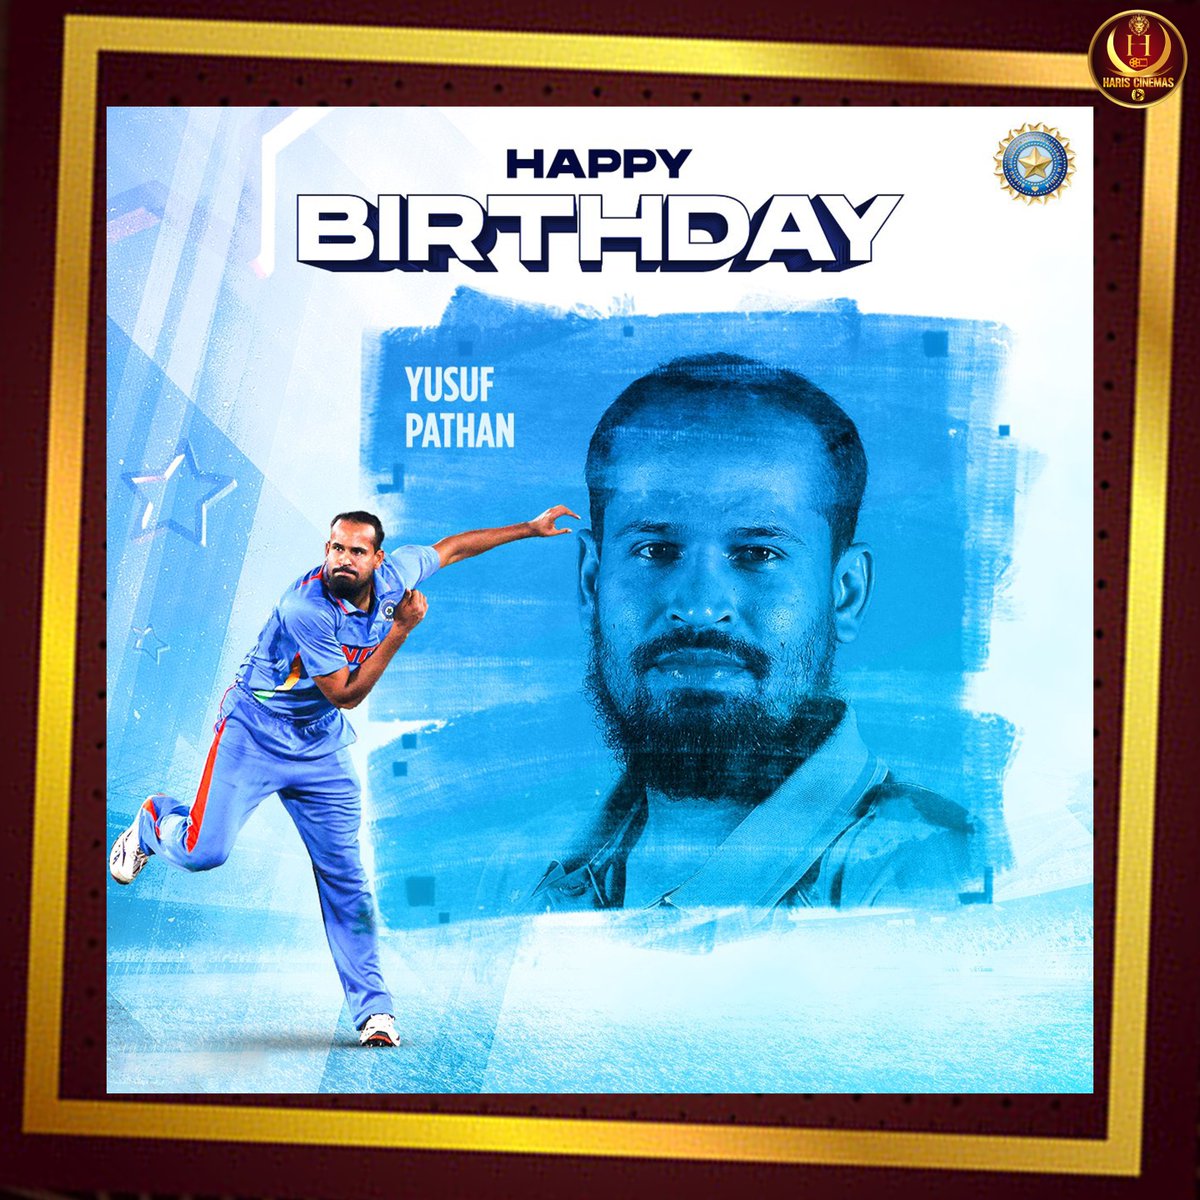 Wish you a very happy birthday Yusuf Pathan #YusufPathan #HappyBirthdayYusufPathan #hariscinemas #HappyBirthdayYusufPathan #HappyBirthday #YusufPathan #Yusuf #T20WorldCup #T20WorldCup2022 #T20WC2022 #India #Teamindia #IPL #Birthday #OnThisDay #Wish #KolkataKnightRiders